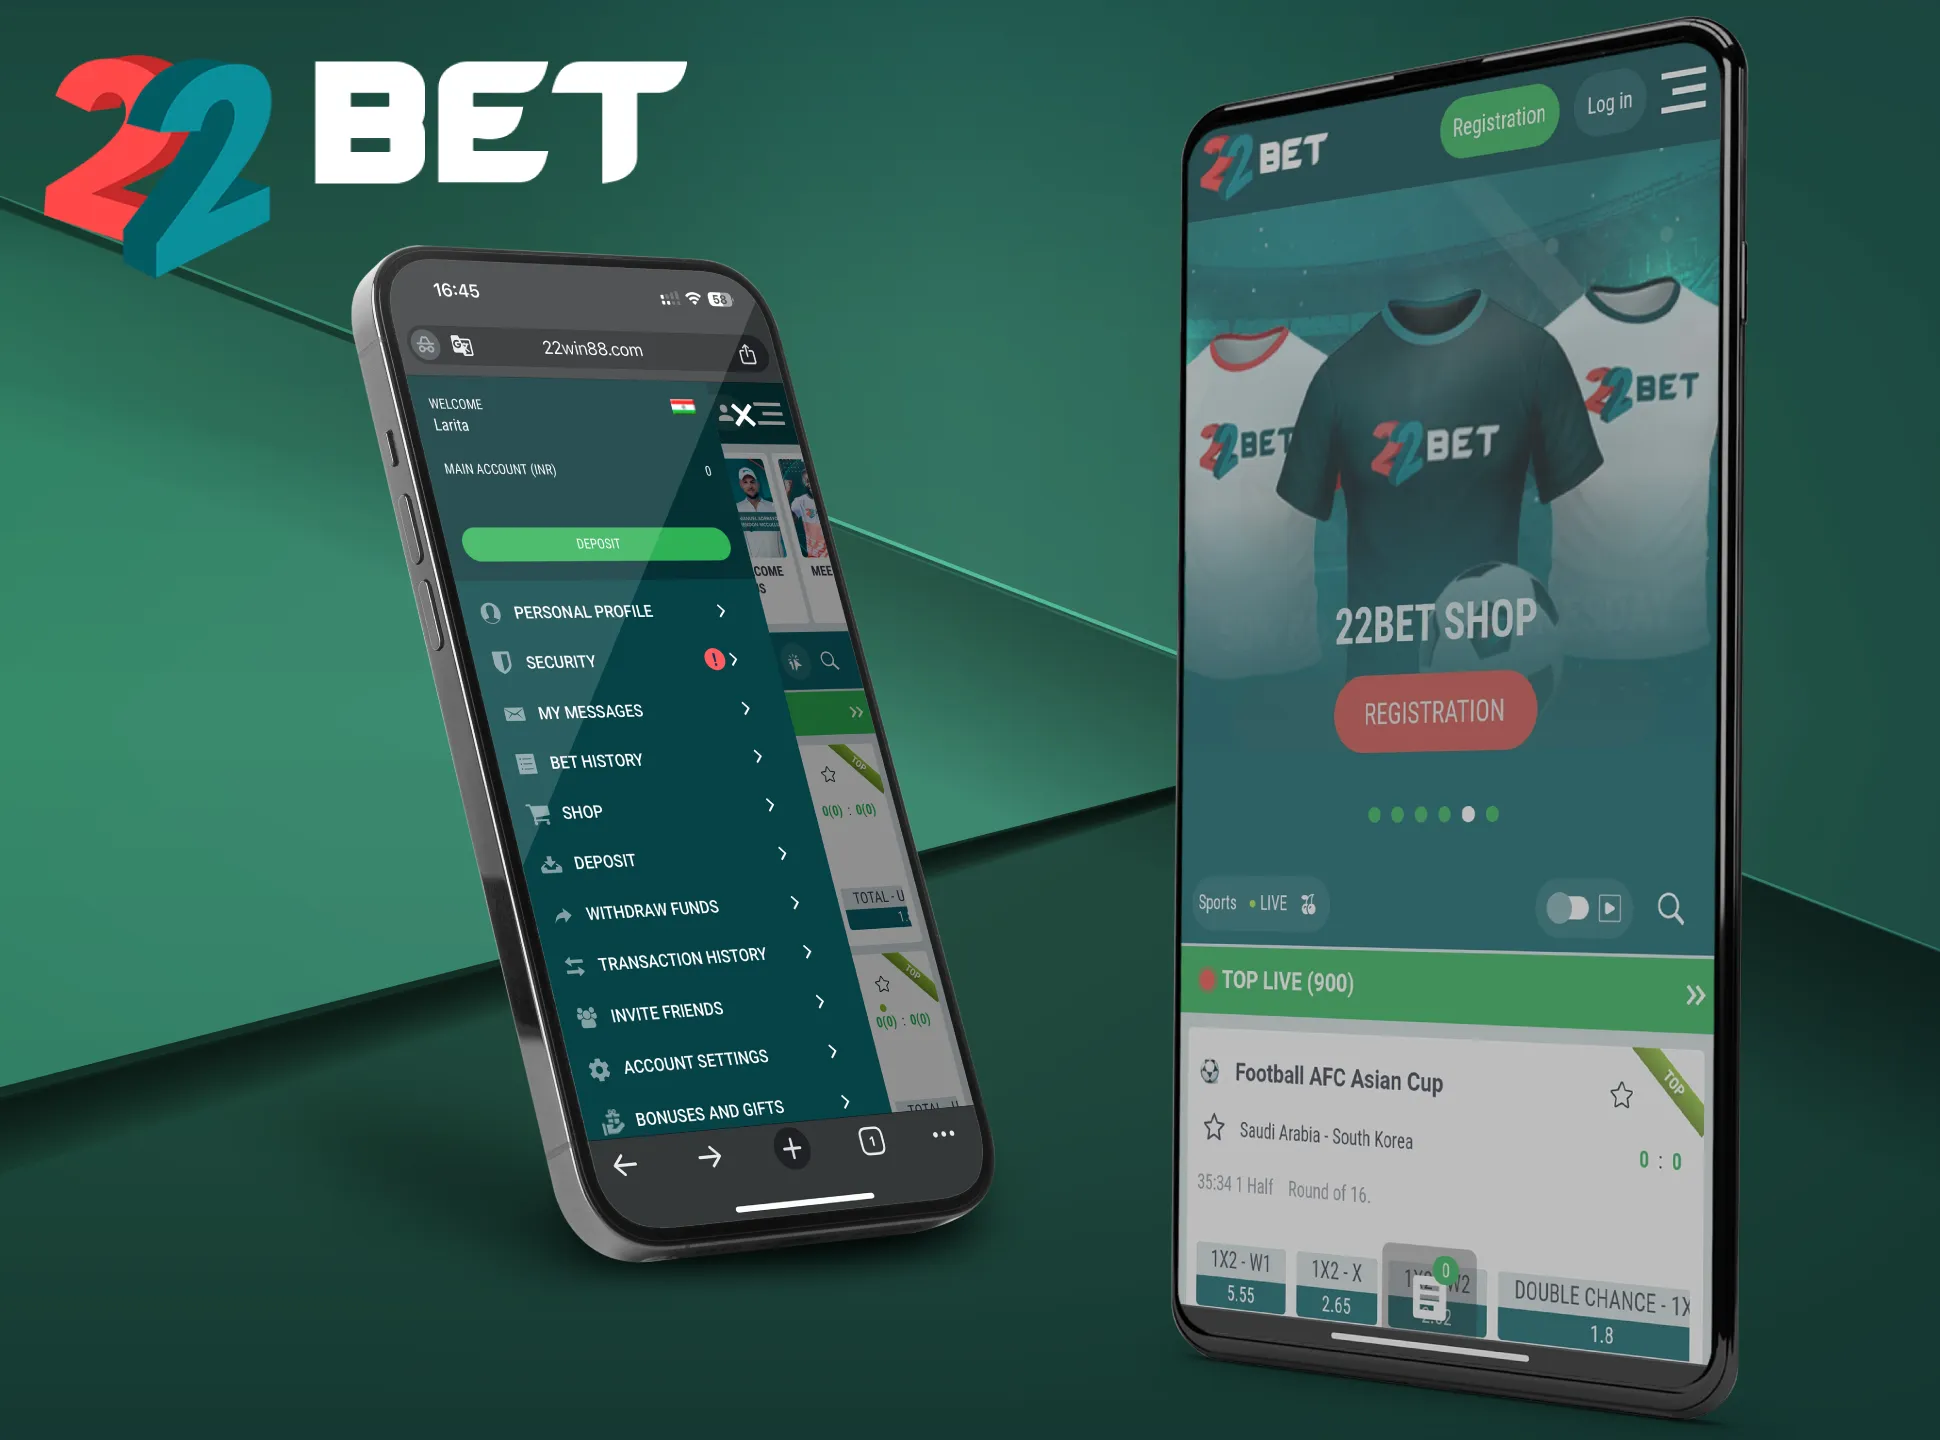 The 22Bet app provides players with exclusive benefits, VIP rewards and prizes.